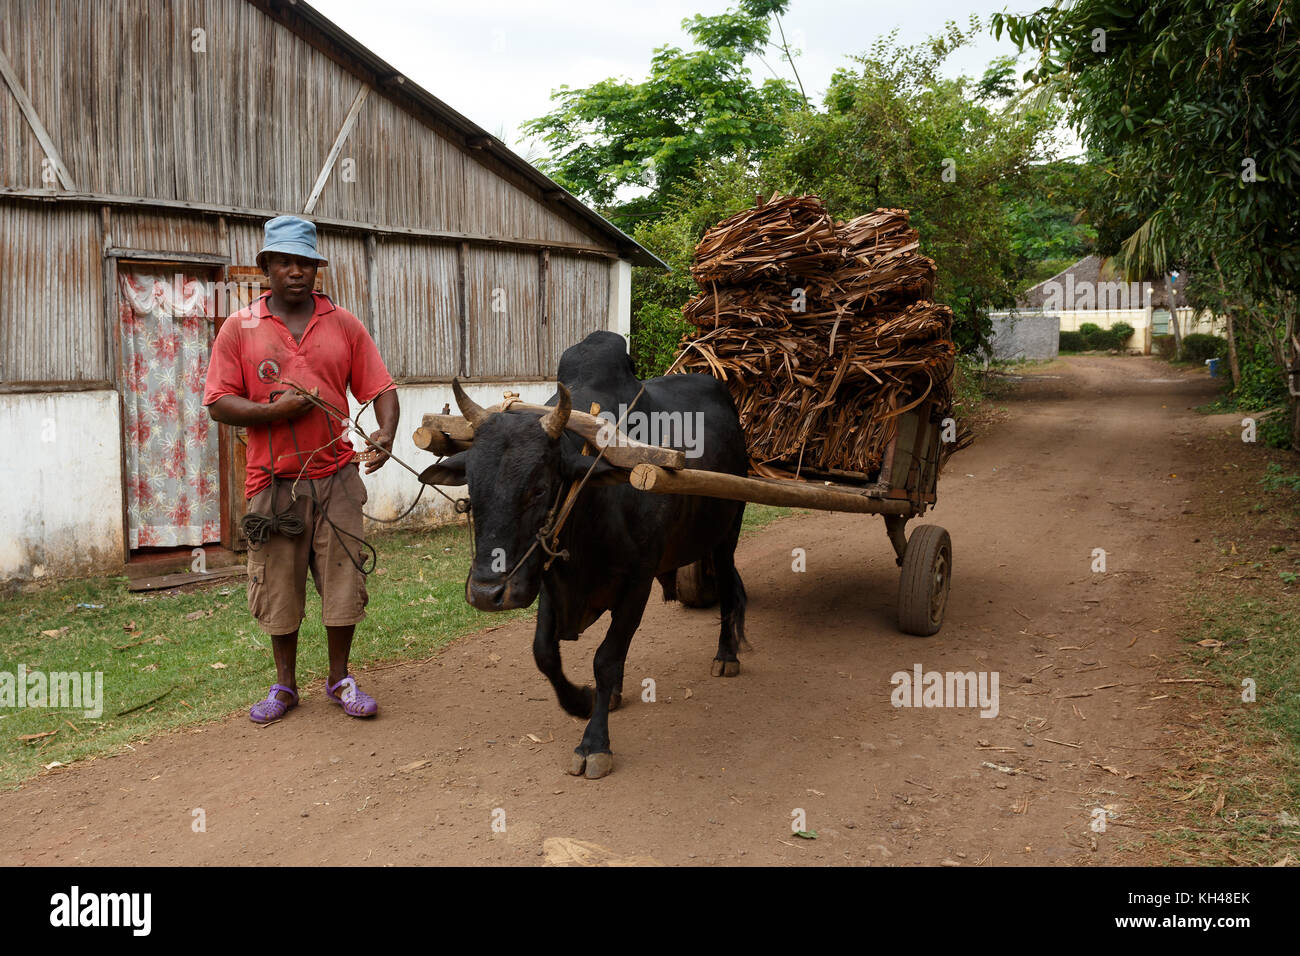 NOSY BE ,MADAGASCAR - NOVEMBER 3.2016 Malagasy farmer riding ox cart in Nosy Be. Ox carts are widely used in Madagascar rural areas. Nosy be, Madagasc Stock Photo